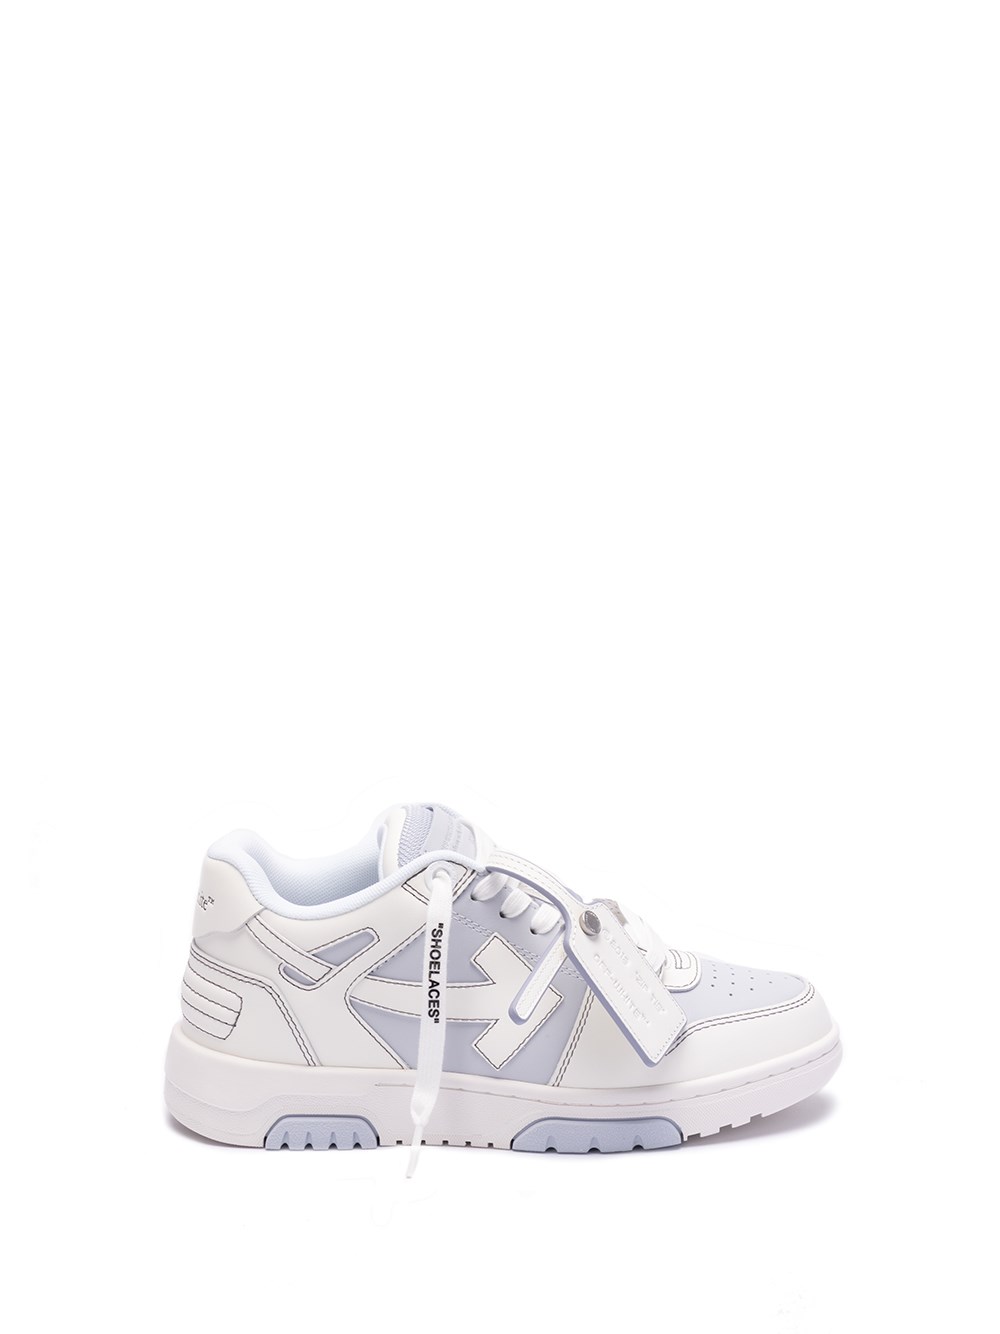 OFF-WHITE `OUT OF OFFICE CALF LEATHER` SNEAKERS